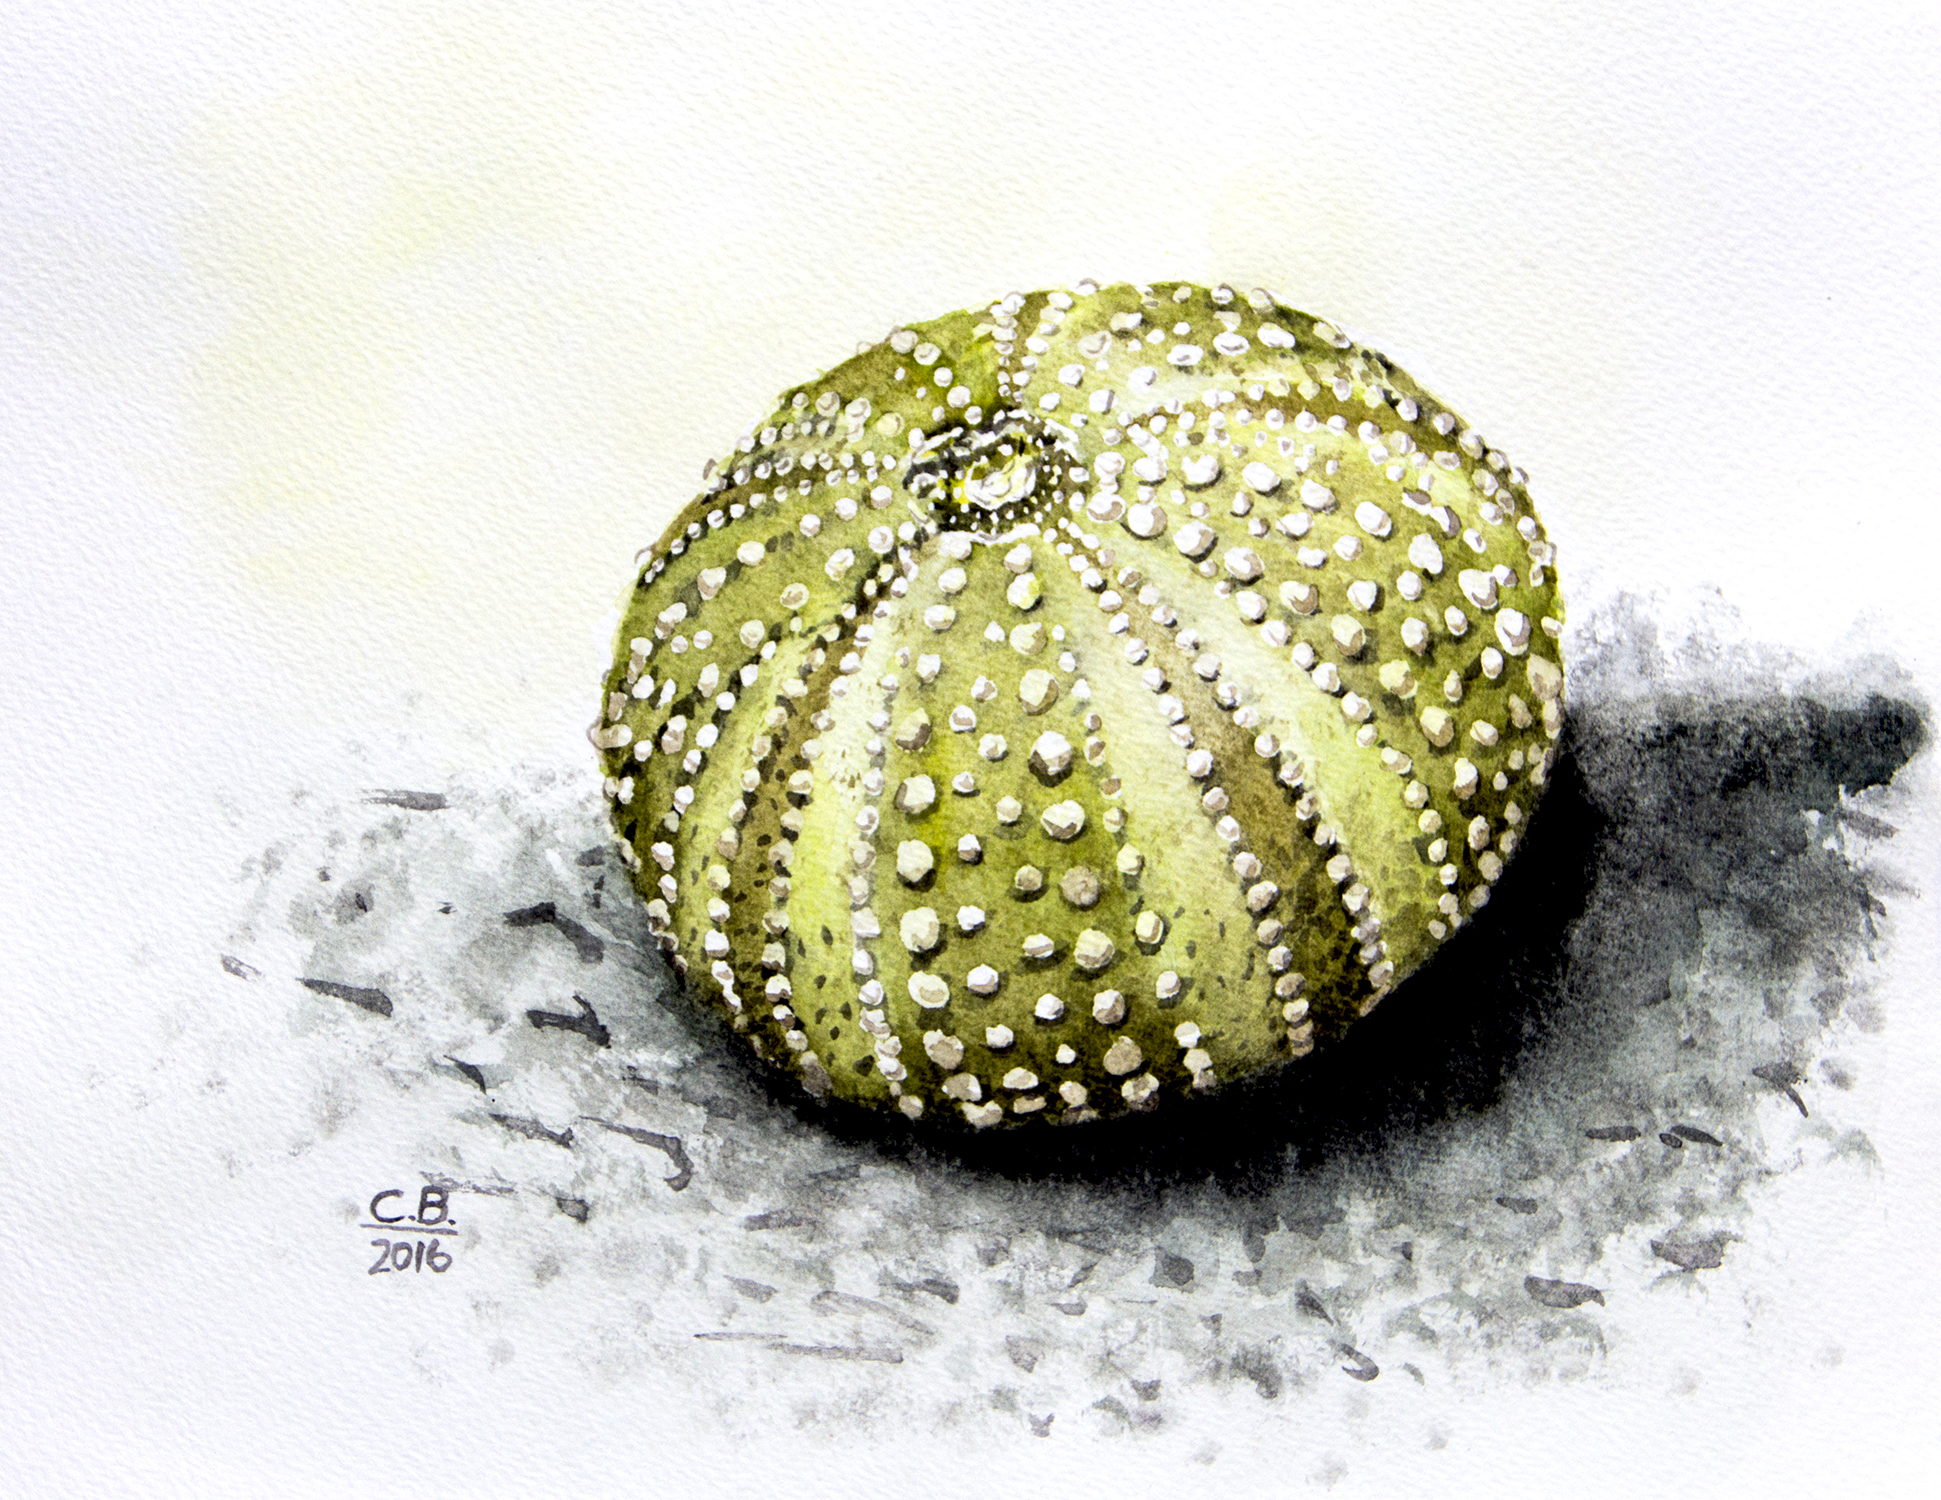 watercolour painting of a sea urchin skeleton